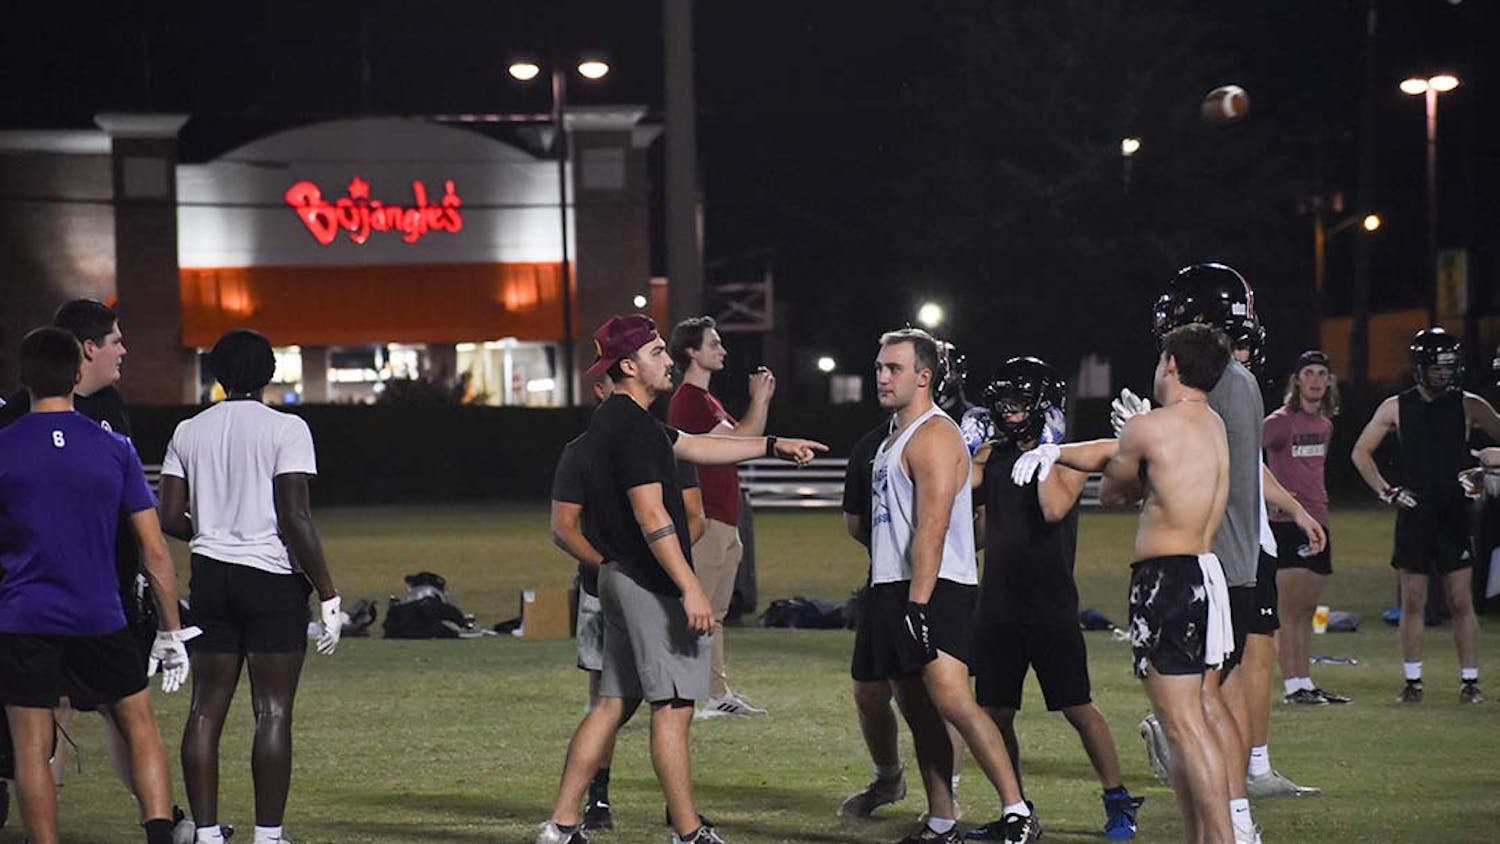 The South Carolina club football team gearing up for practice at Bluff Road Field outside of Williams-Brice Stadium.